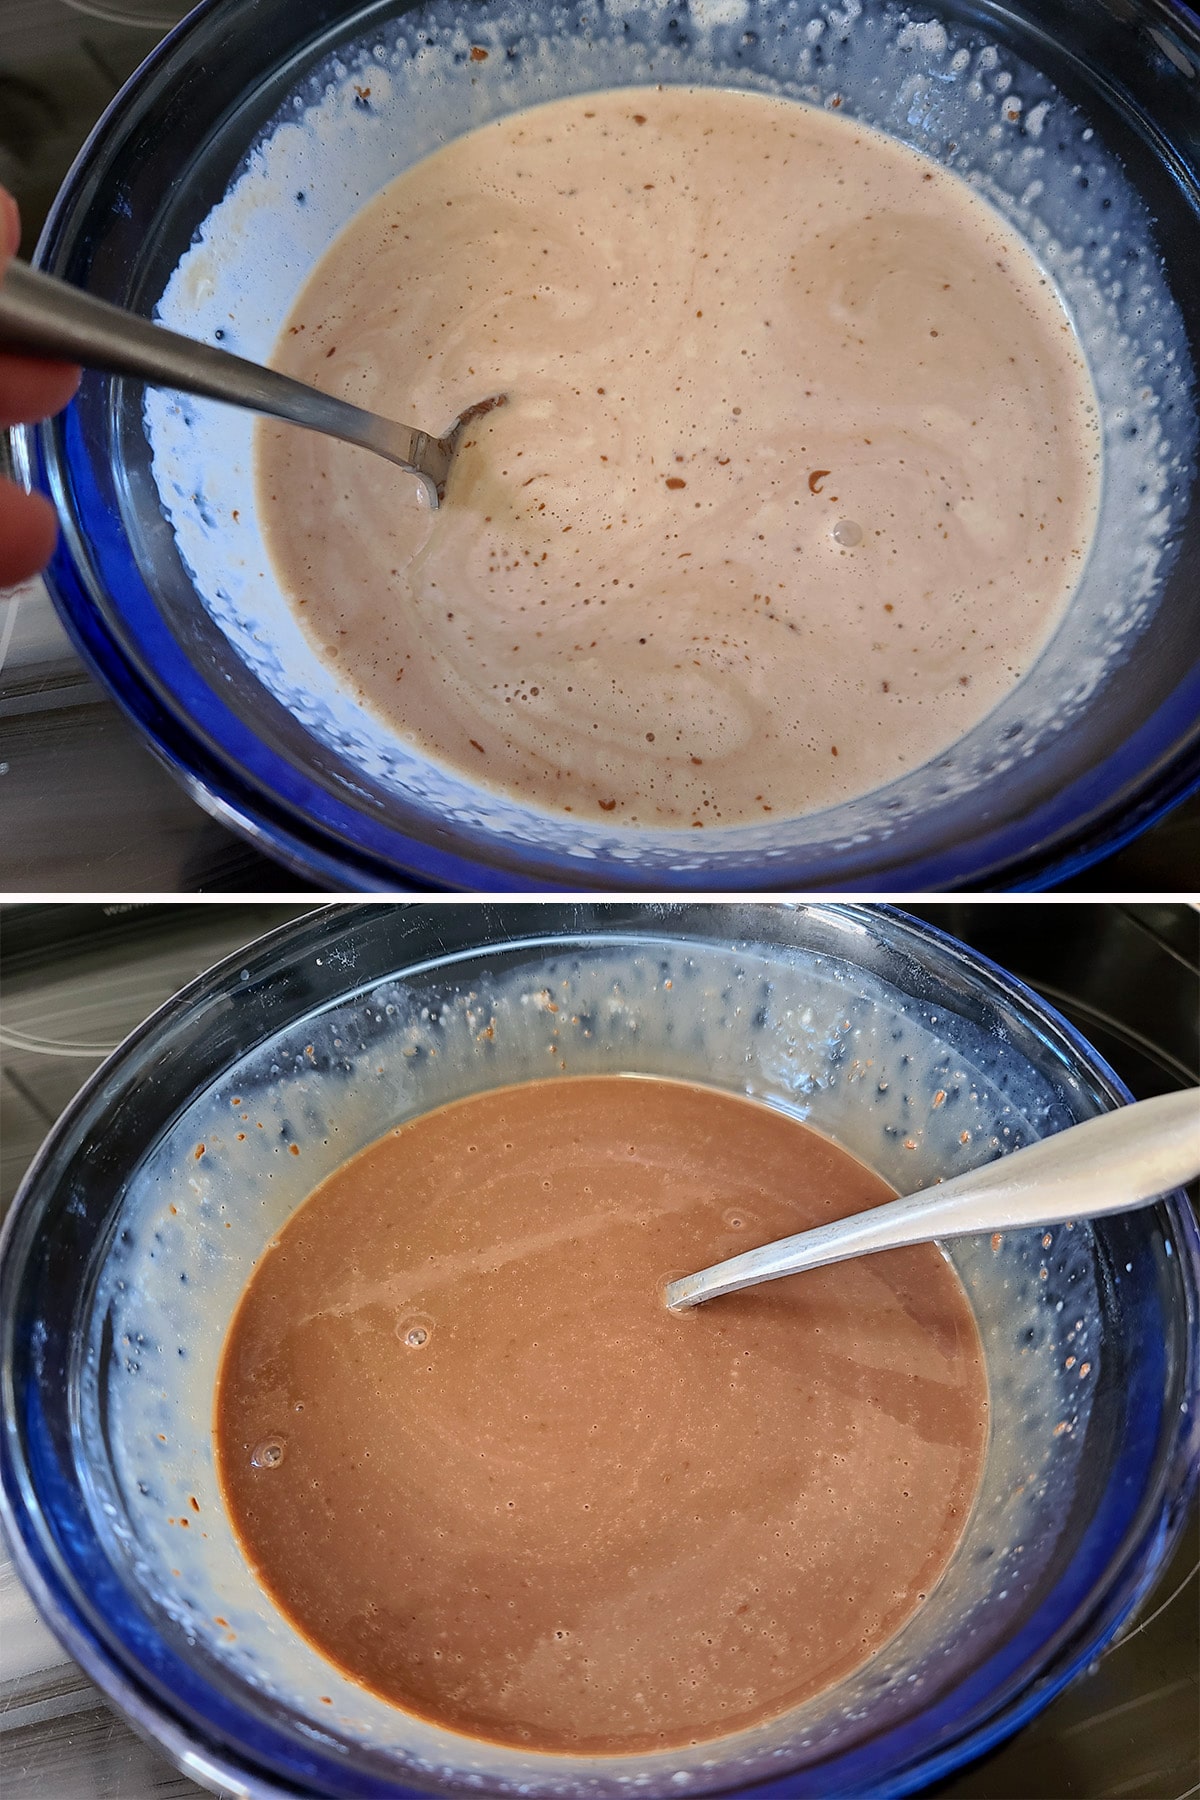 A 2 part image showing the hot cream being stirred into the melted chocolate chips.